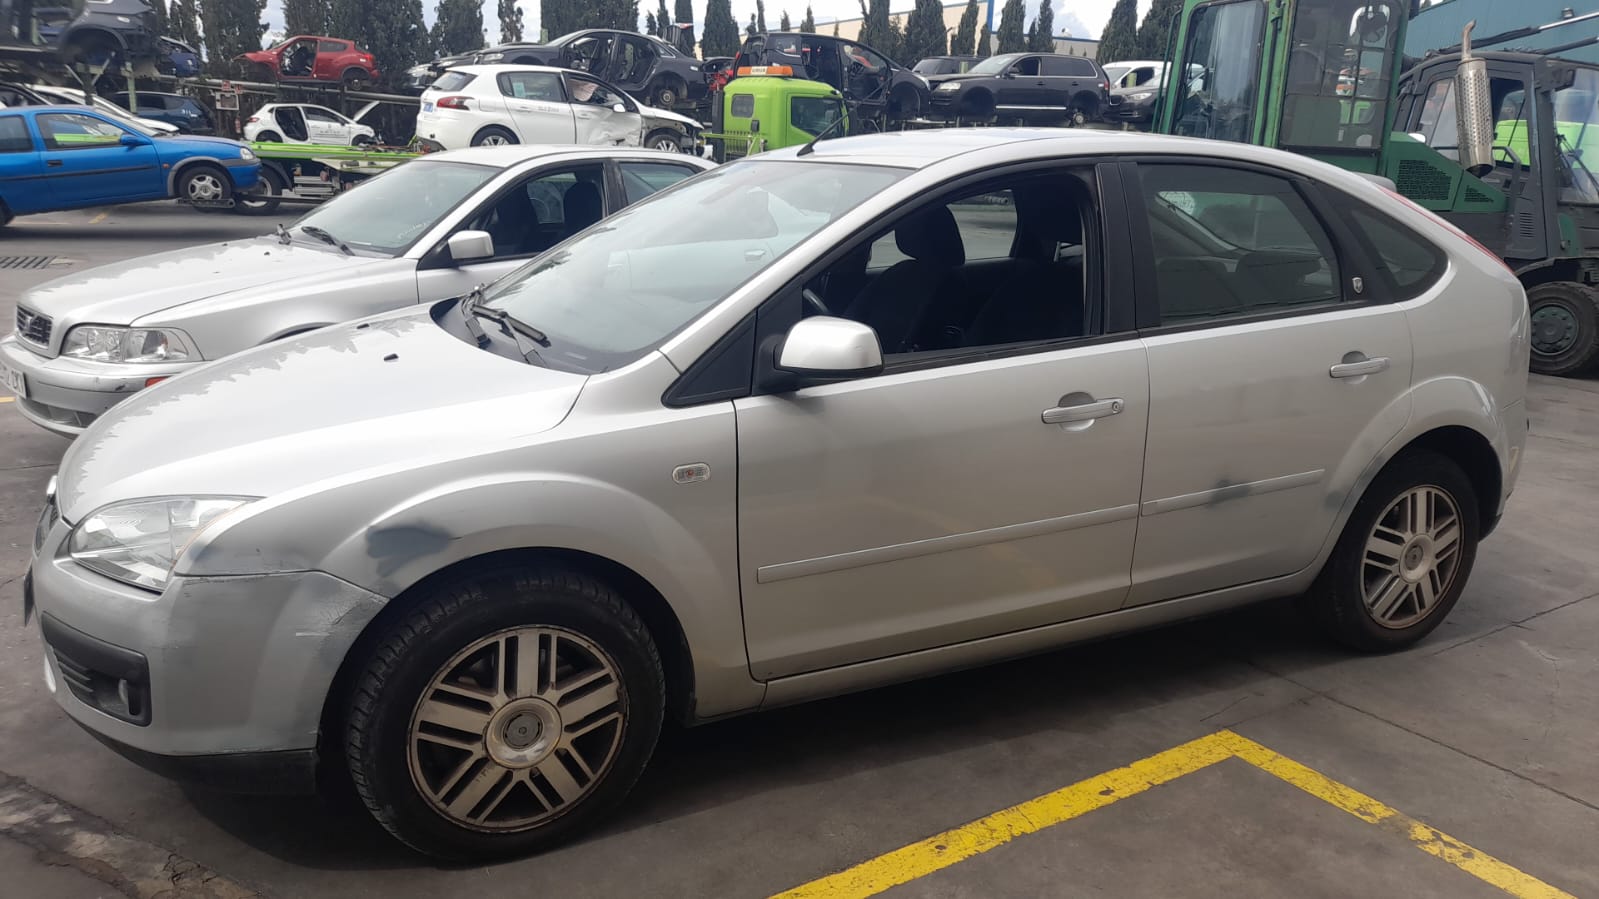 FORD Focus 2 generation (2004-2011) Tелевизор 1675180 24697158